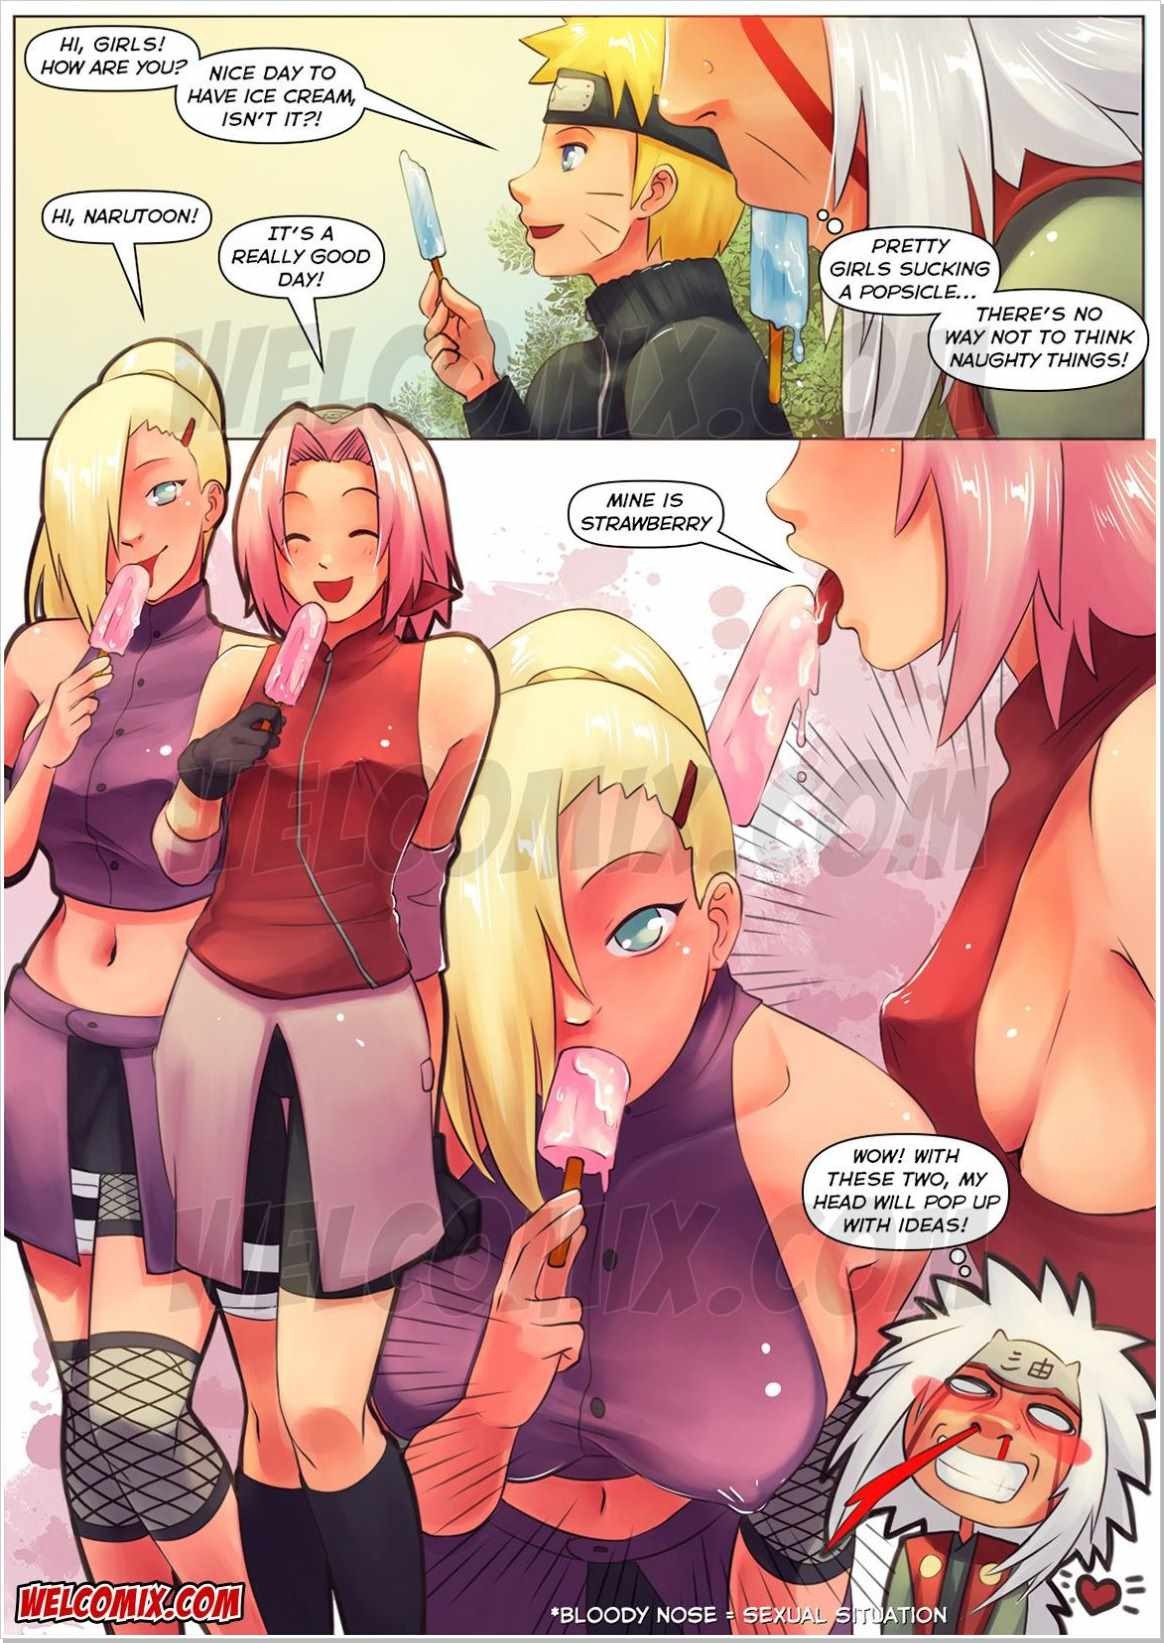 Narutoon 2 - The Erotic Book Writer porn comic picture 4